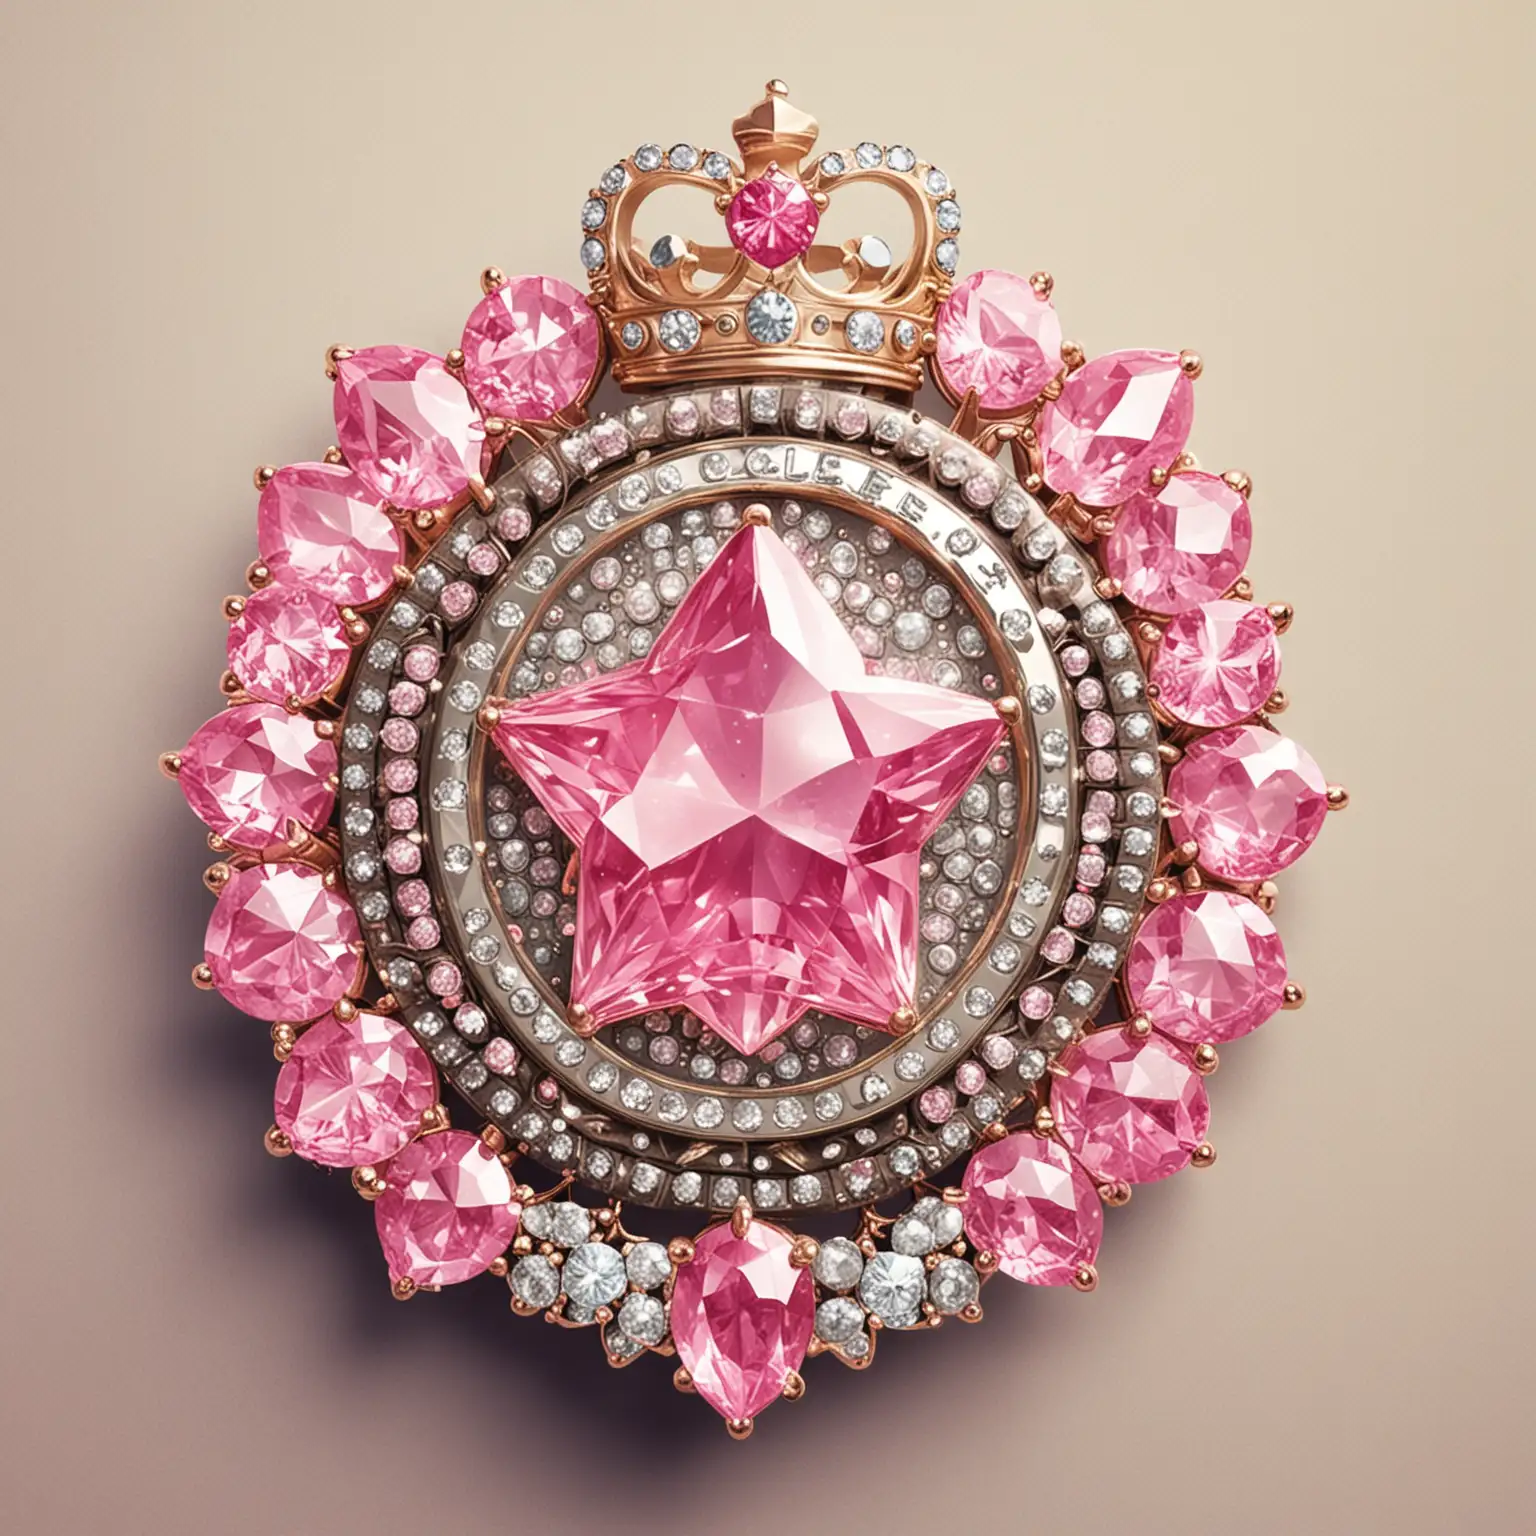 A cartoon police badge with a Princess tiara and pink gemstones and no letters